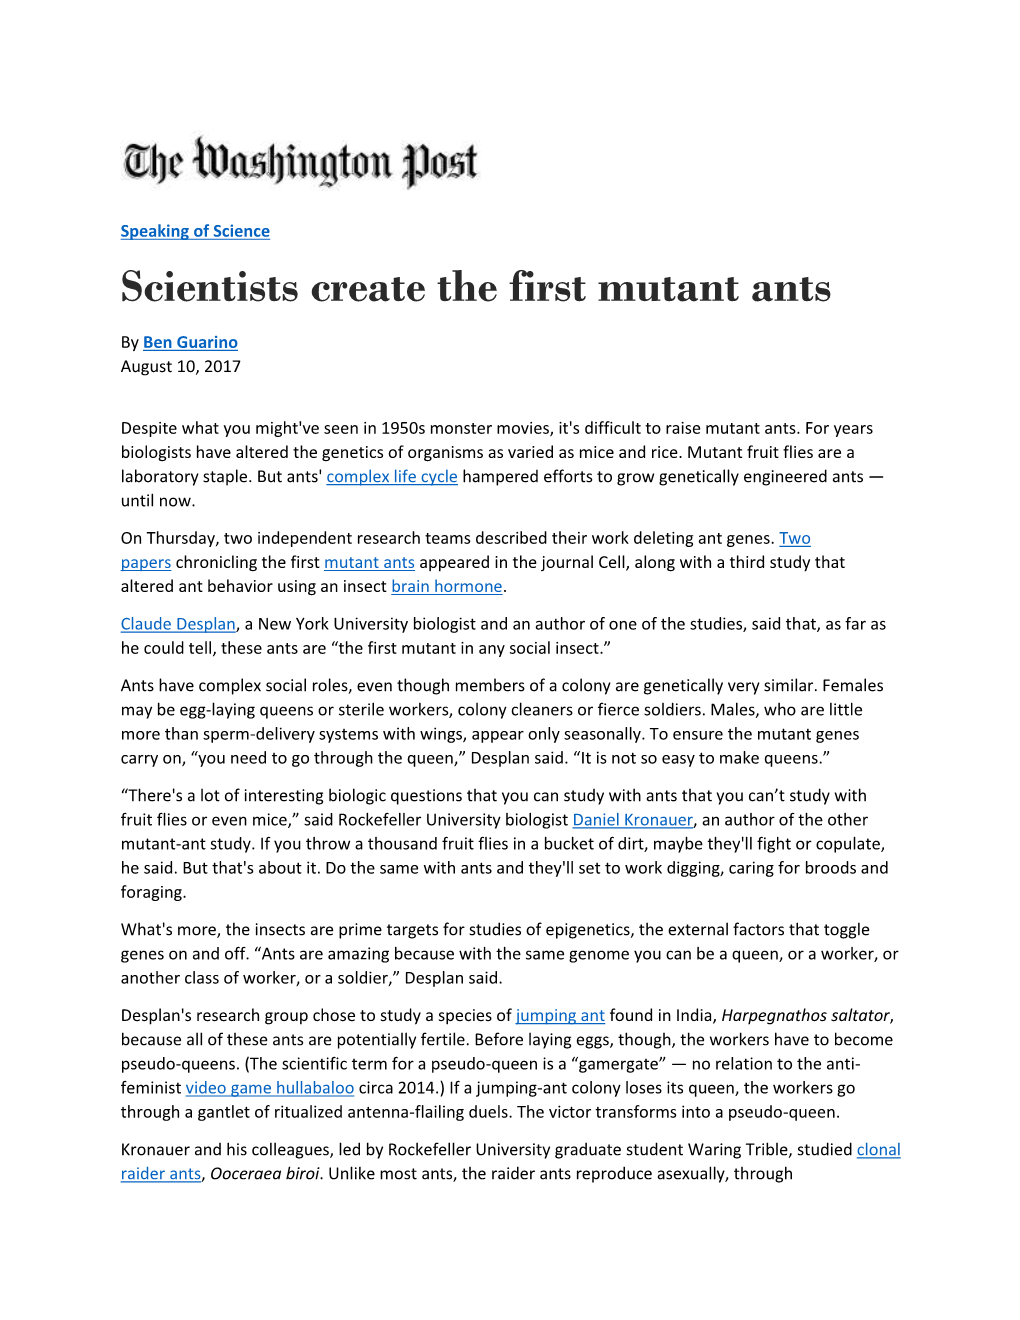 Scientists Create the First Mutant Ants